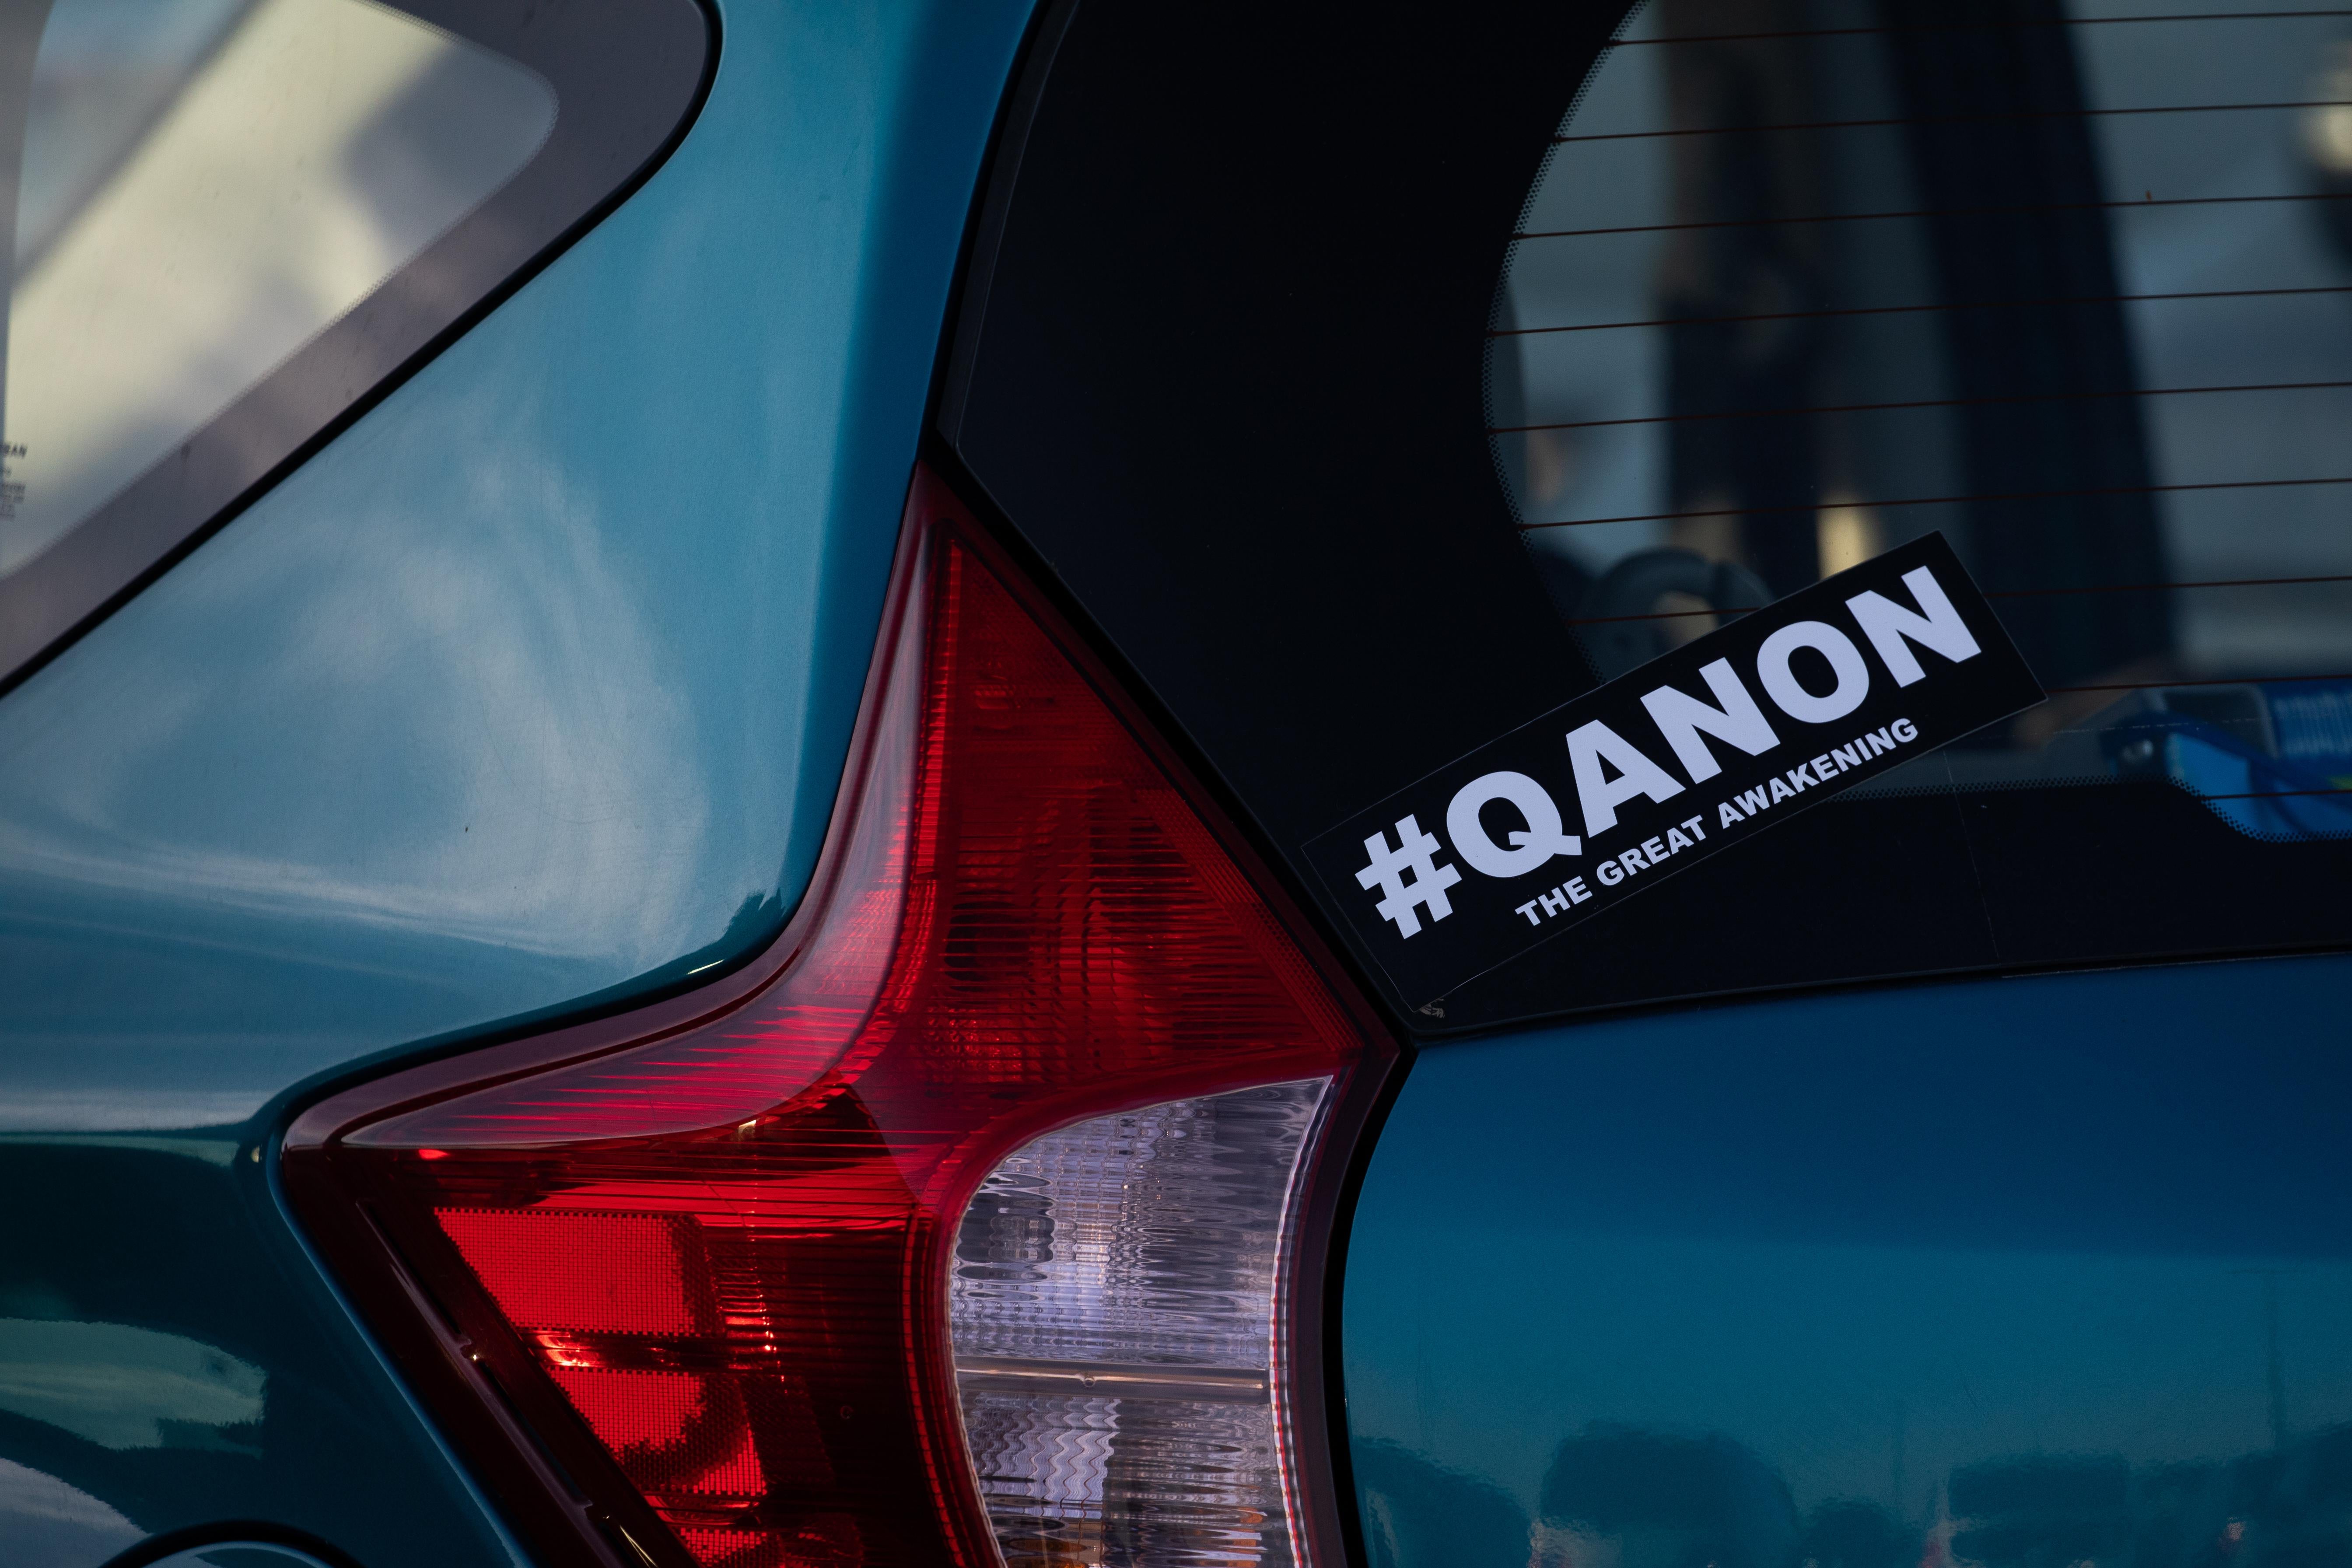 A bumber sticker on a car window says #QANON, the great awakening.